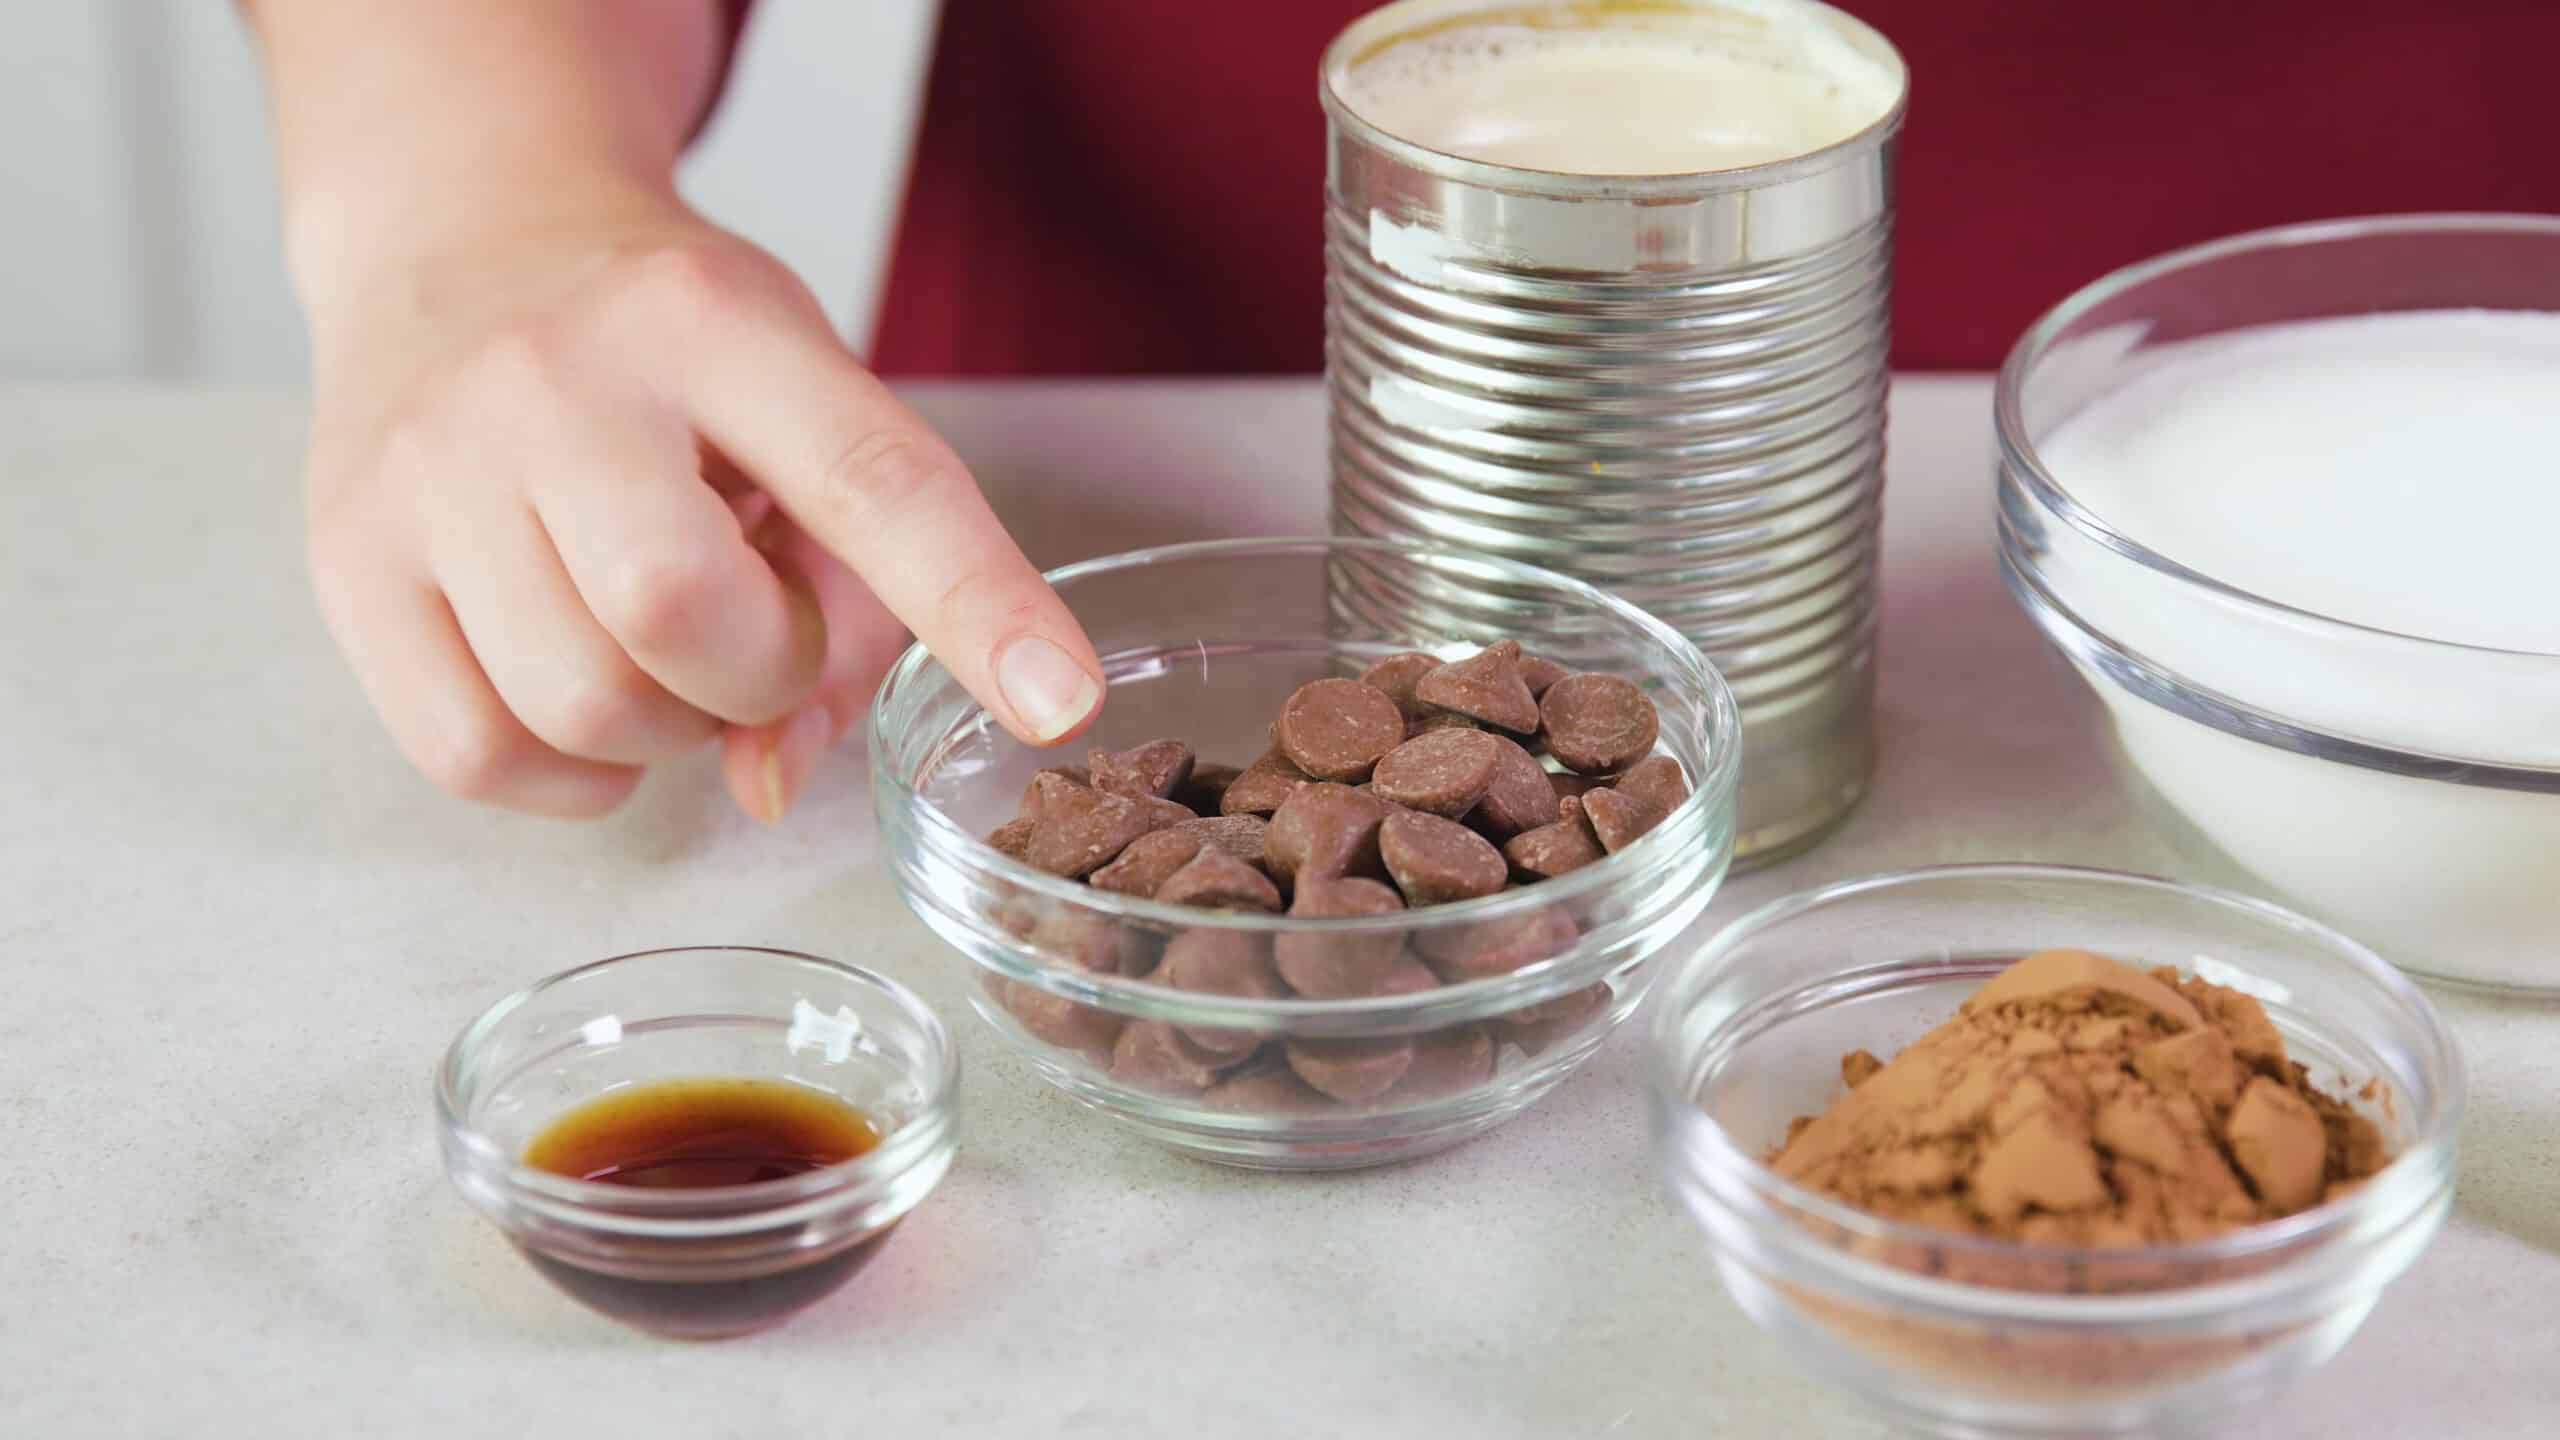 A series of ingredients laid out on a countertop including a clear dish of vanilla extract, cocoa powder in a clear dish, granulated sugar in a clear dish, a aluminum can of sweetened condensed milk. and some chocolate melting chips in a clear dish.